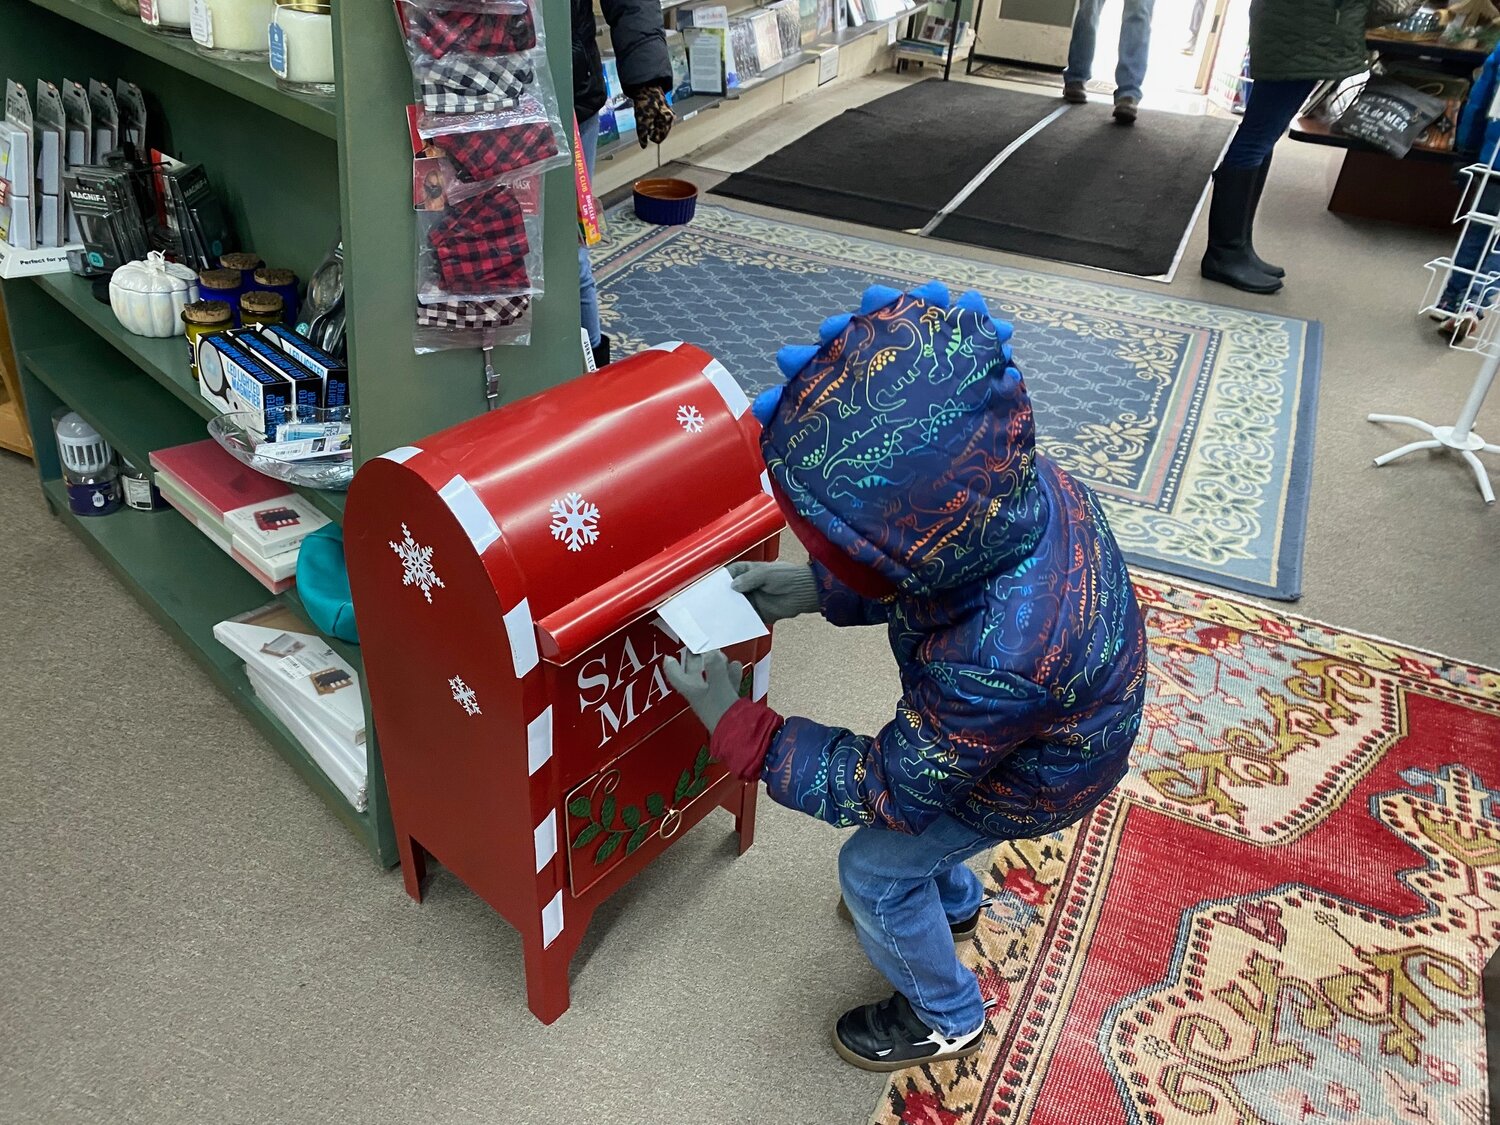 A letter to Santa is dropped in a mailbox in downtown Chehalis in this photo provided by Experience Chehalis.